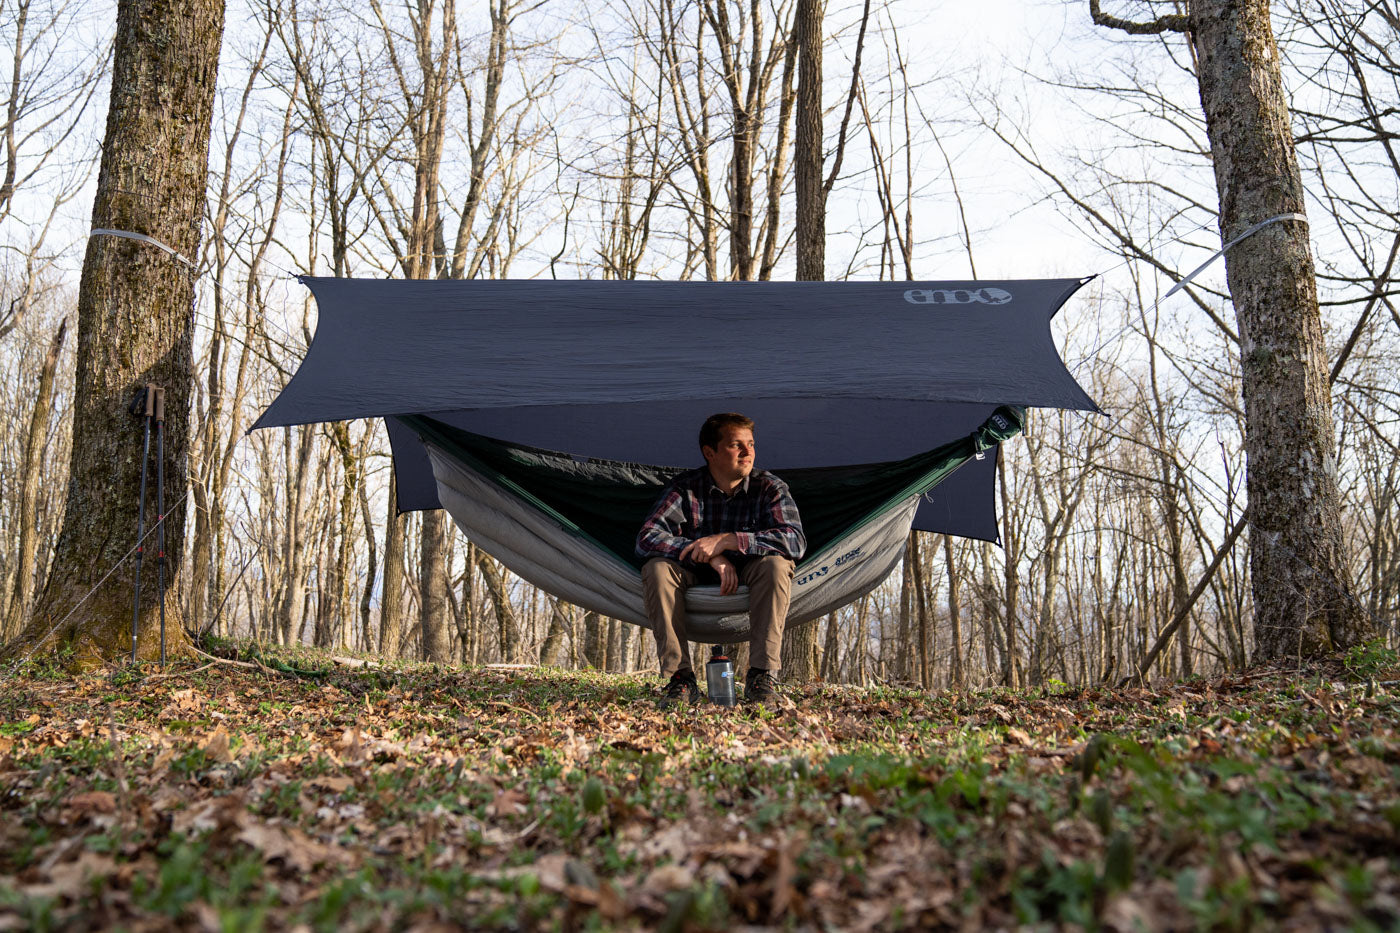 A man sits in his ENO hammock camping set up while looking off into the sun.